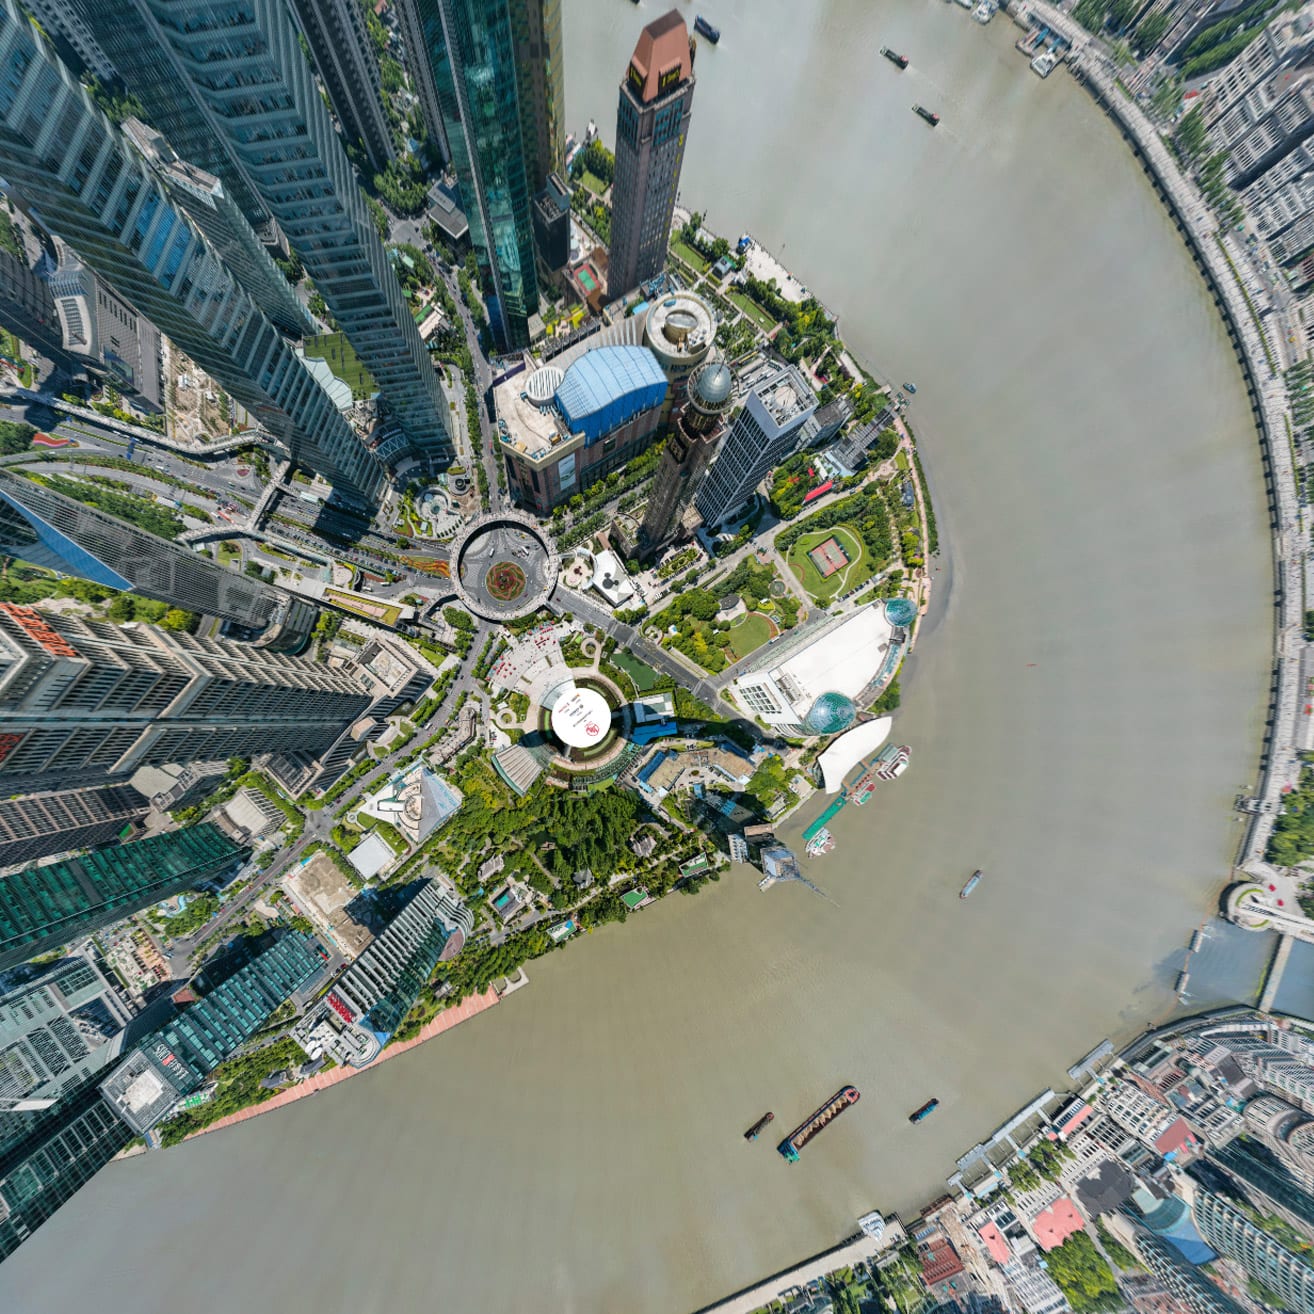 195-gigapixel photo of Shanghai by BigPixel allows viewers to zoom in on street-level detail